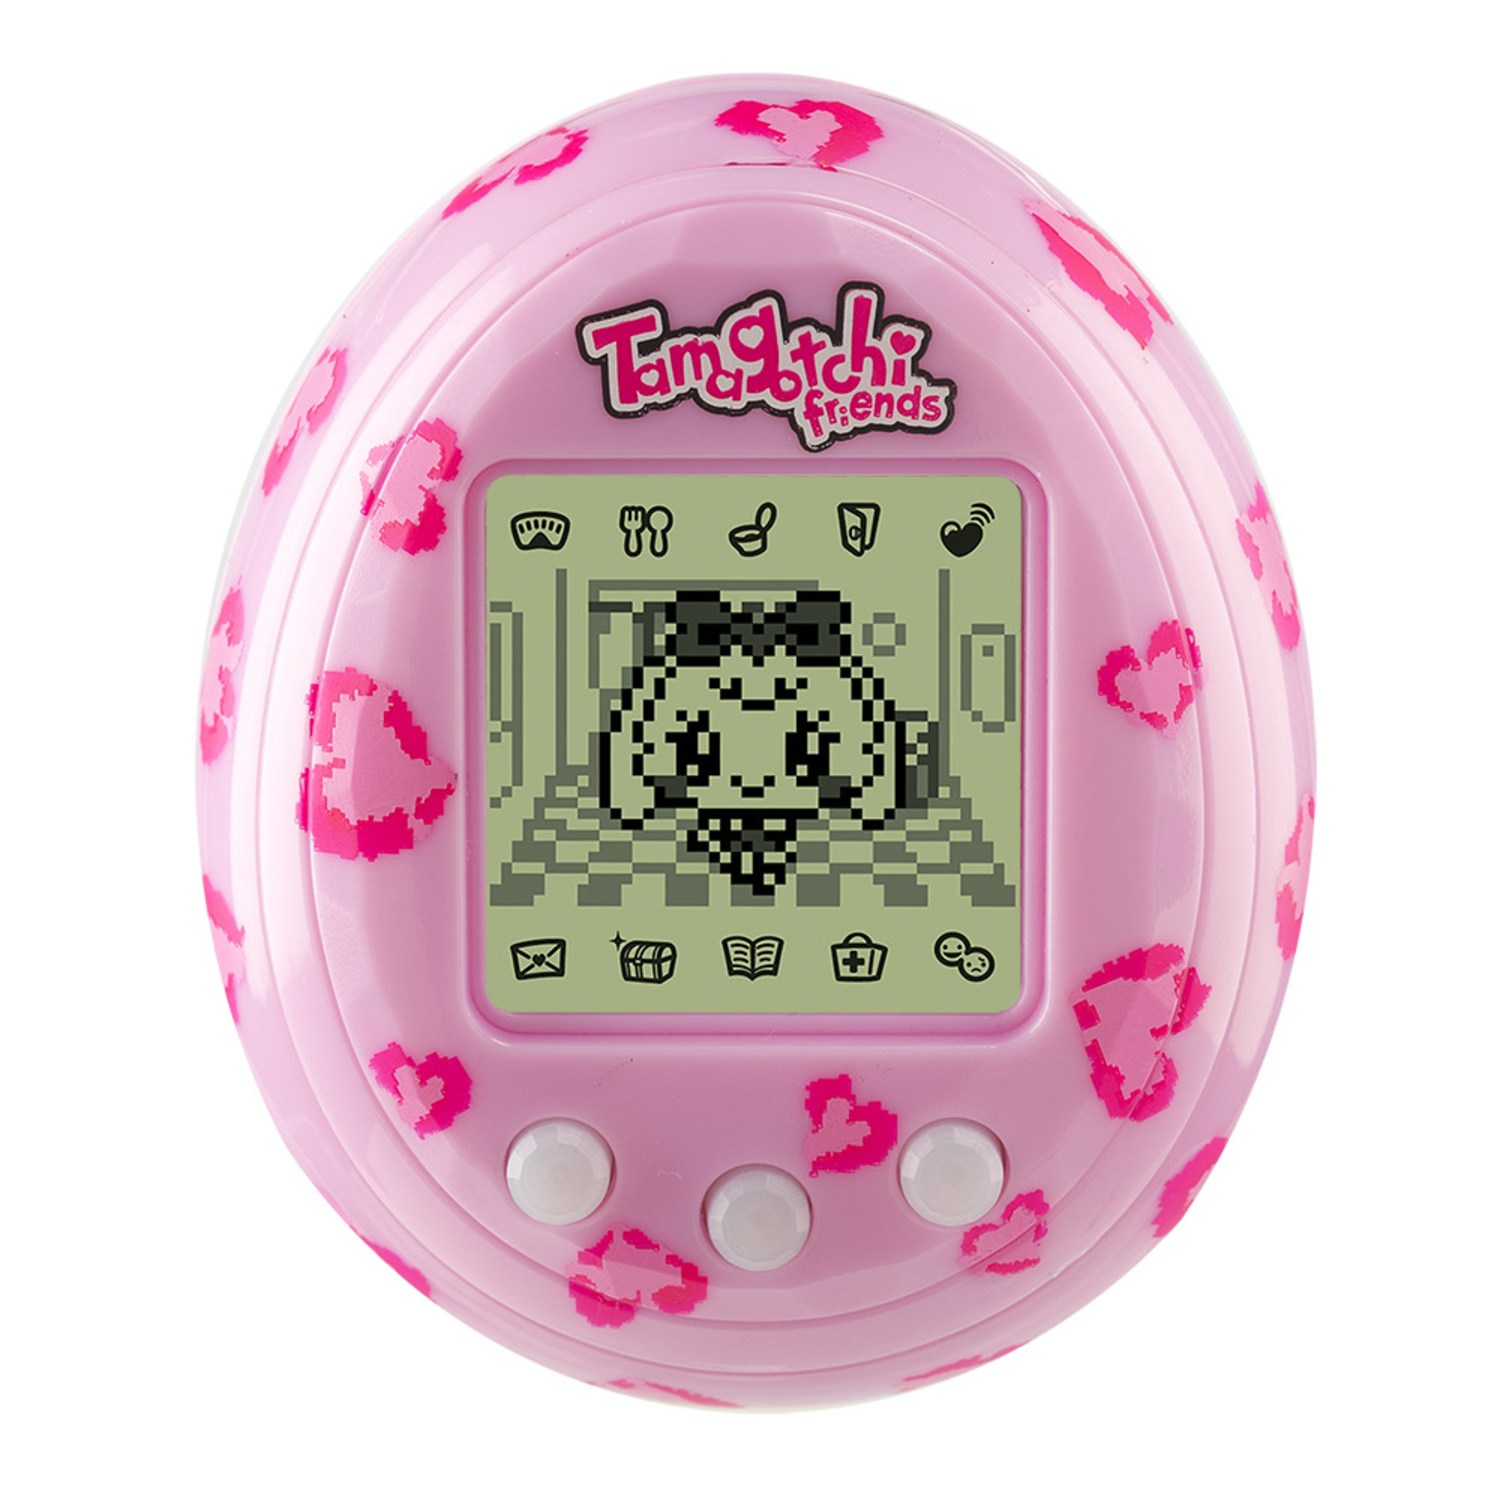 Miss Tamagotchis? Bring this cute little robot friend into your life